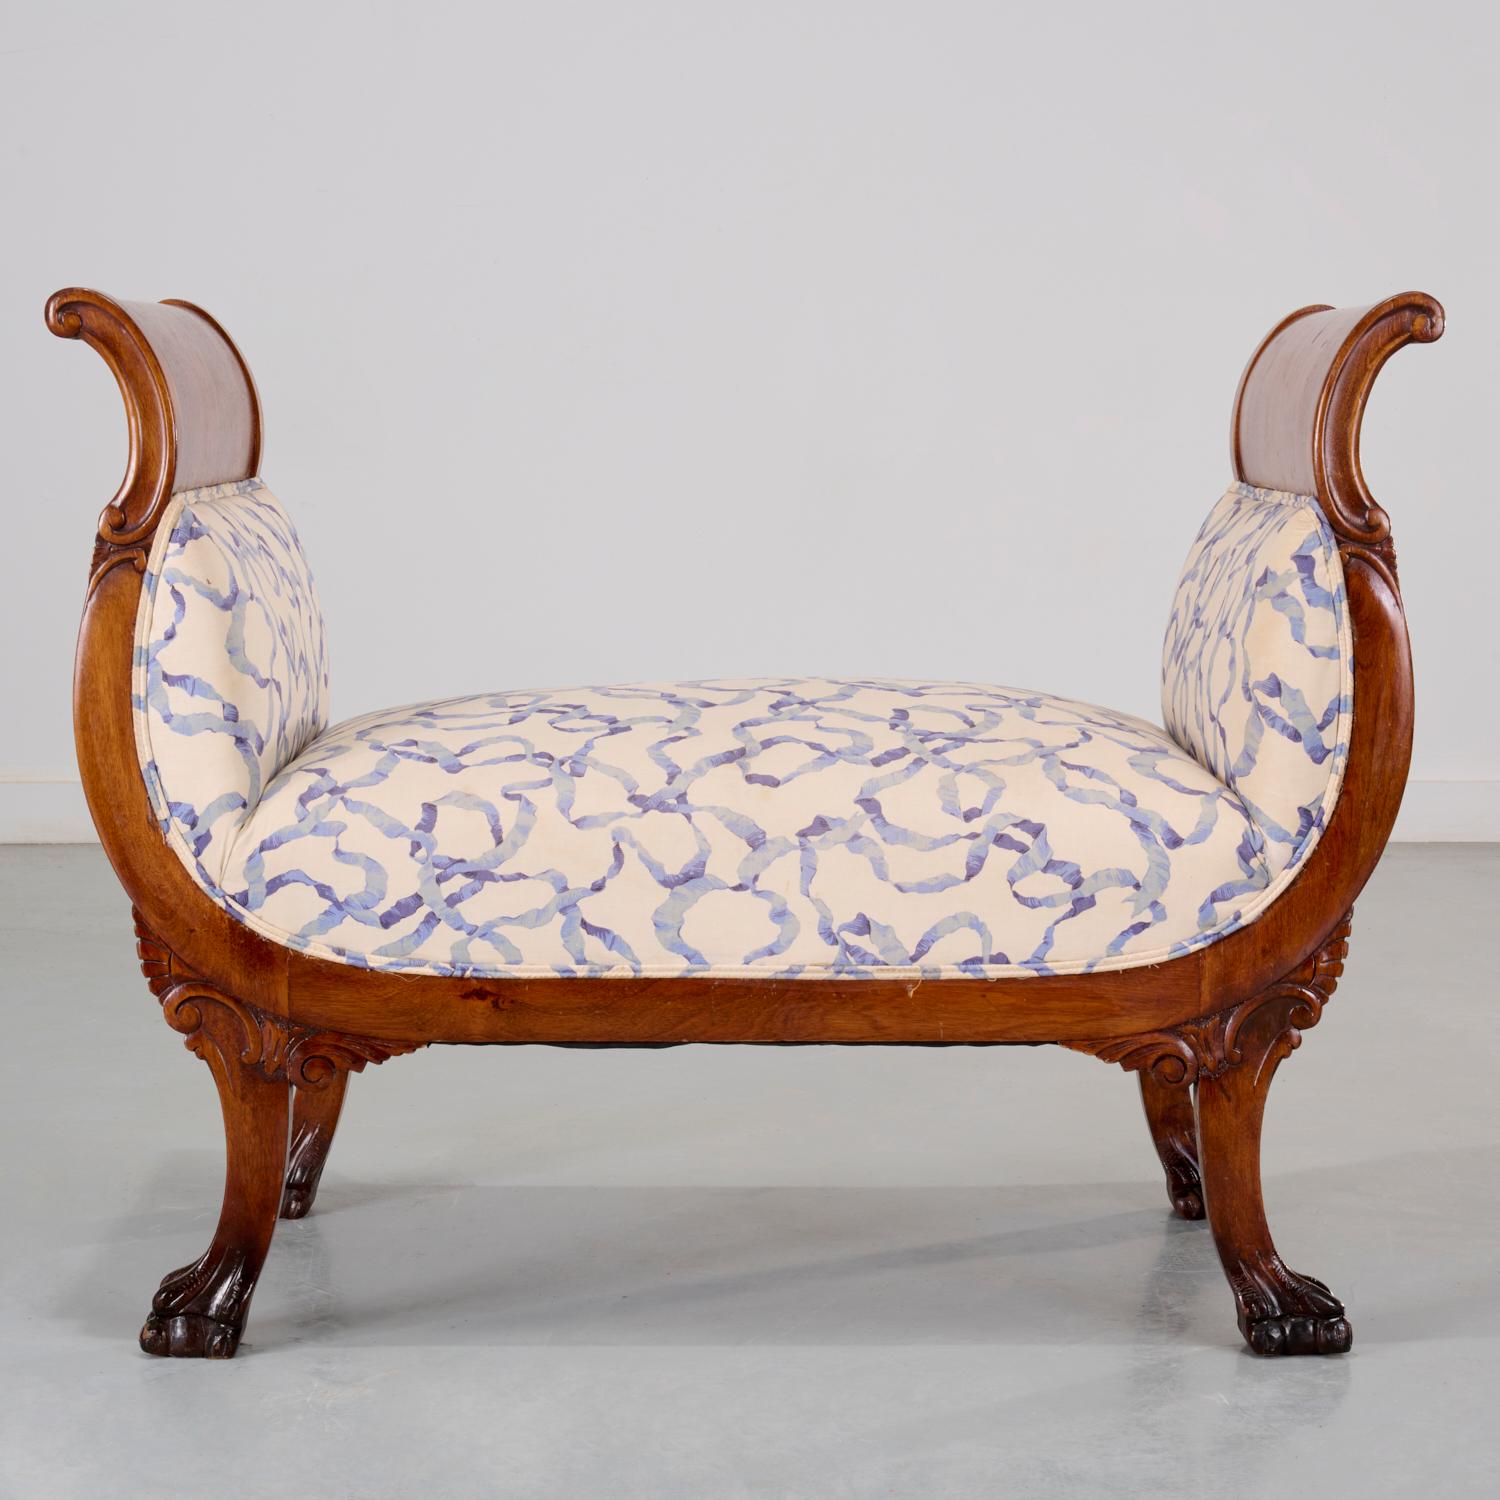 A 19th c., American Empire mahogany bench with outward scrolling arms raised on carved winged legs terminating in paw feet. The seat and sides have been newly upholstered in a striking white linen fabric printed with a flowing blue ribbon design.